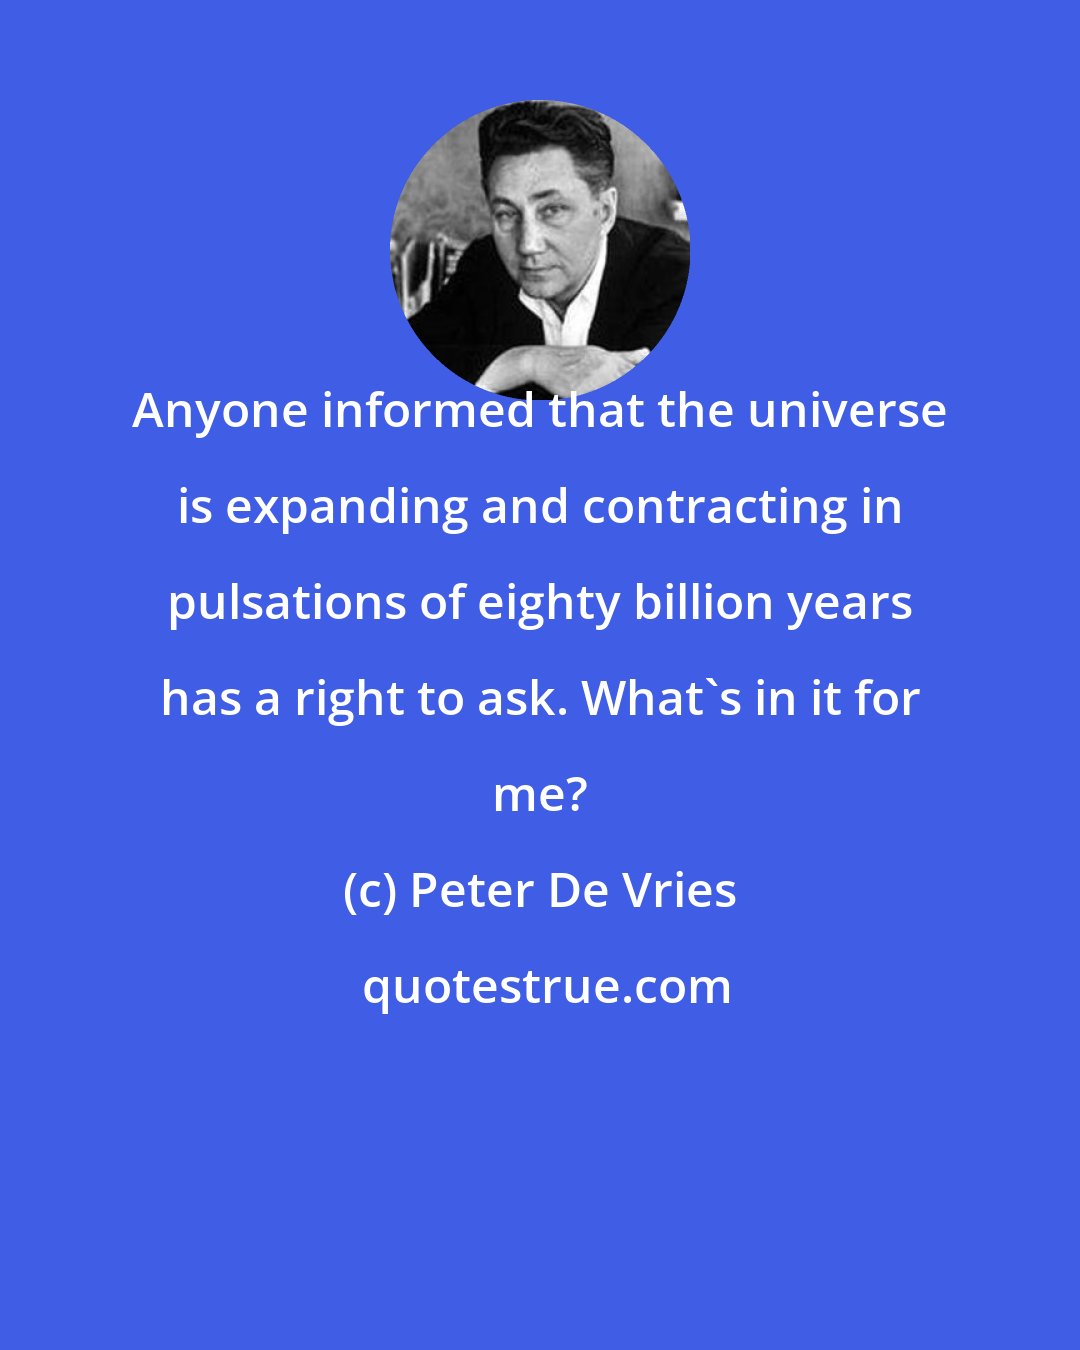 Peter De Vries: Anyone informed that the universe is expanding and contracting in pulsations of eighty billion years has a right to ask. What's in it for me?